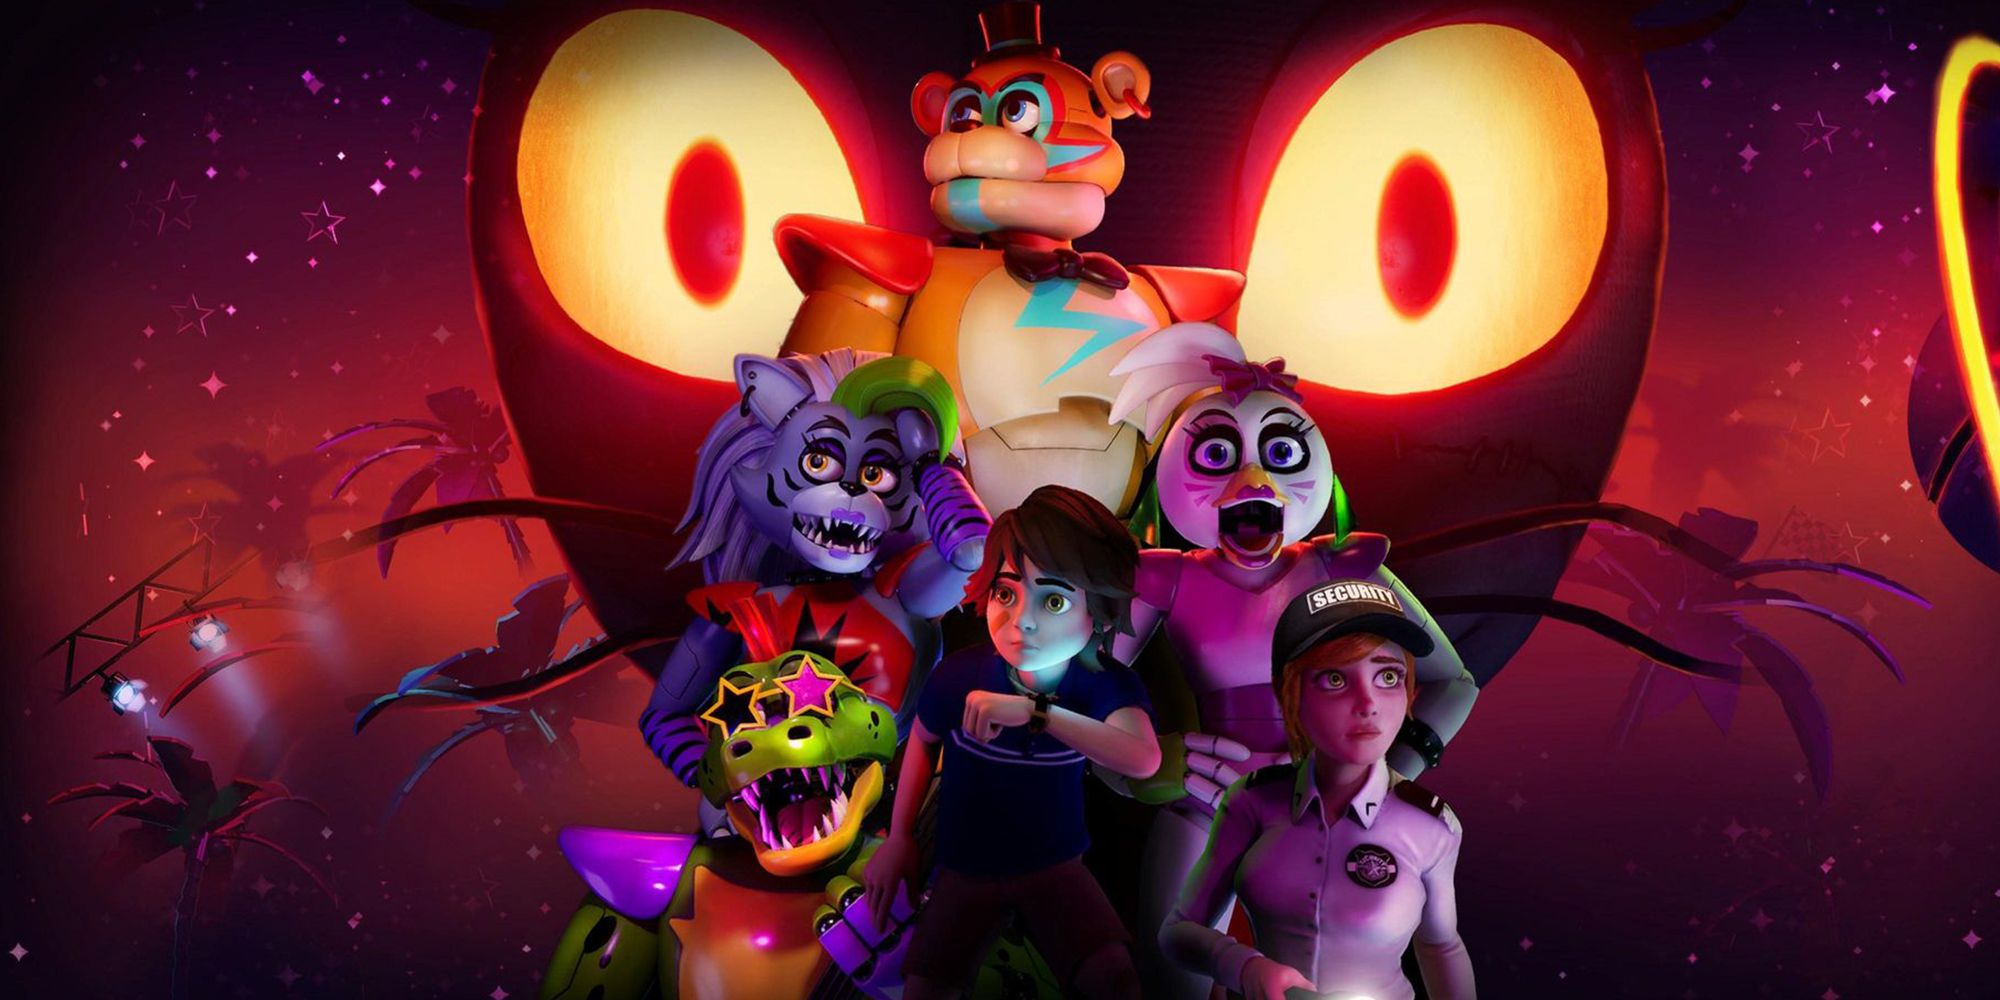 Five Nights at Freddy's game Security Breach coming to PS5 in 2021